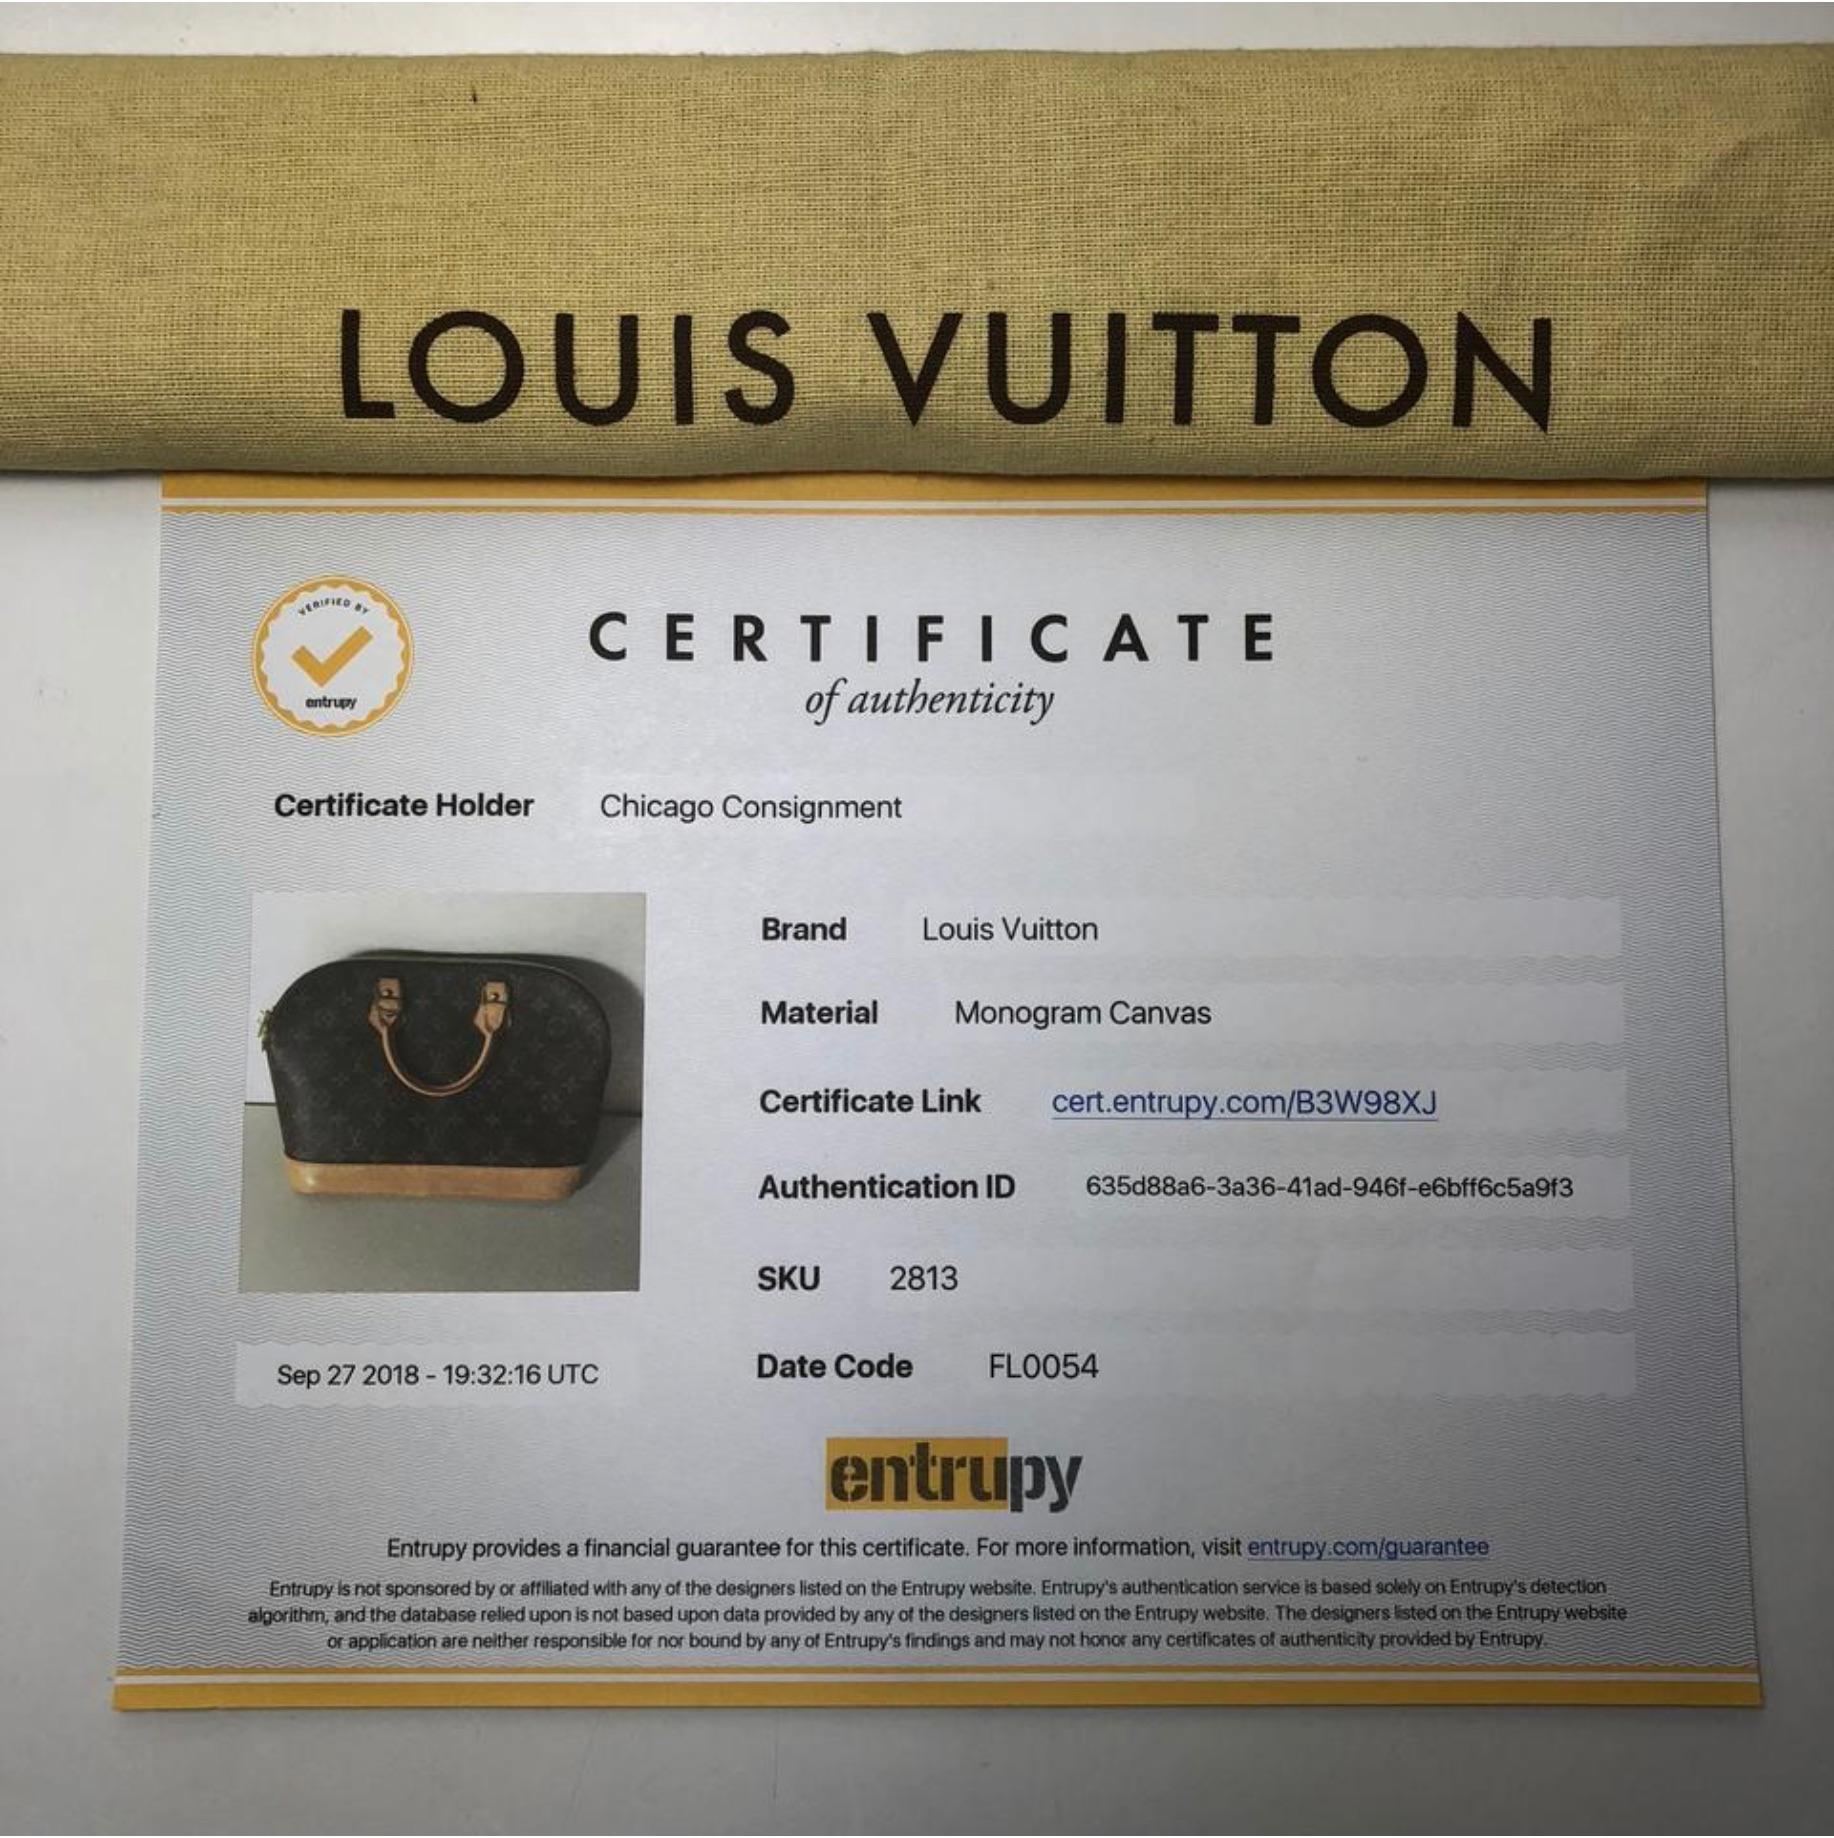 MODEL - Louis Vuitton Monogram Alma PM Satchel Handbag

CONDITION - Exceptional! Light vachette, light watermarks, no handle darkening, no dryness. Bright and shiny hardware with no tarnishing. No rips, holes, tears, stains or odors. Piece maintains